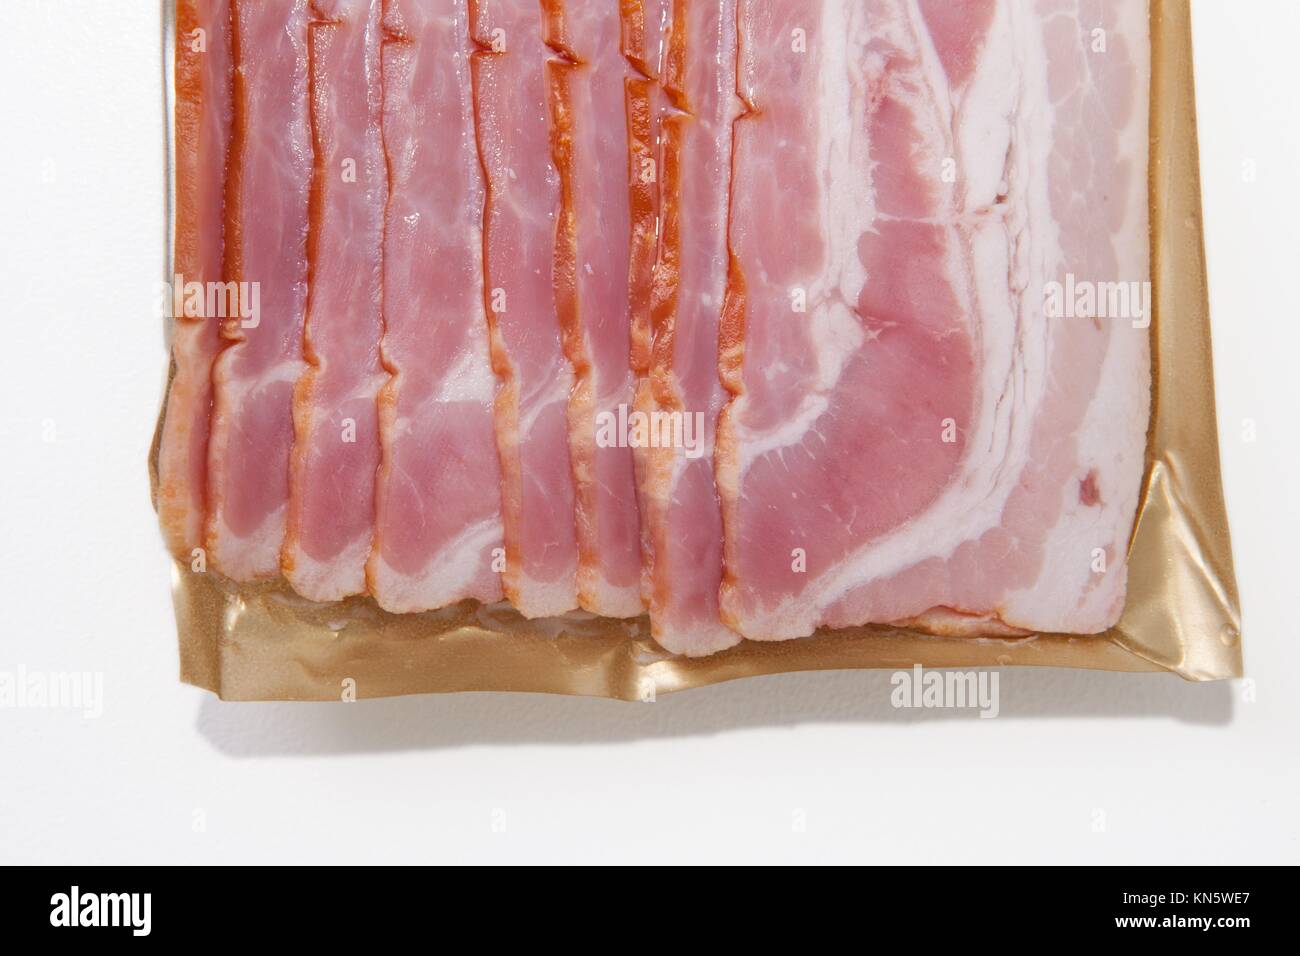 Bacon slices on the package, isolated on white background. Stock Photo